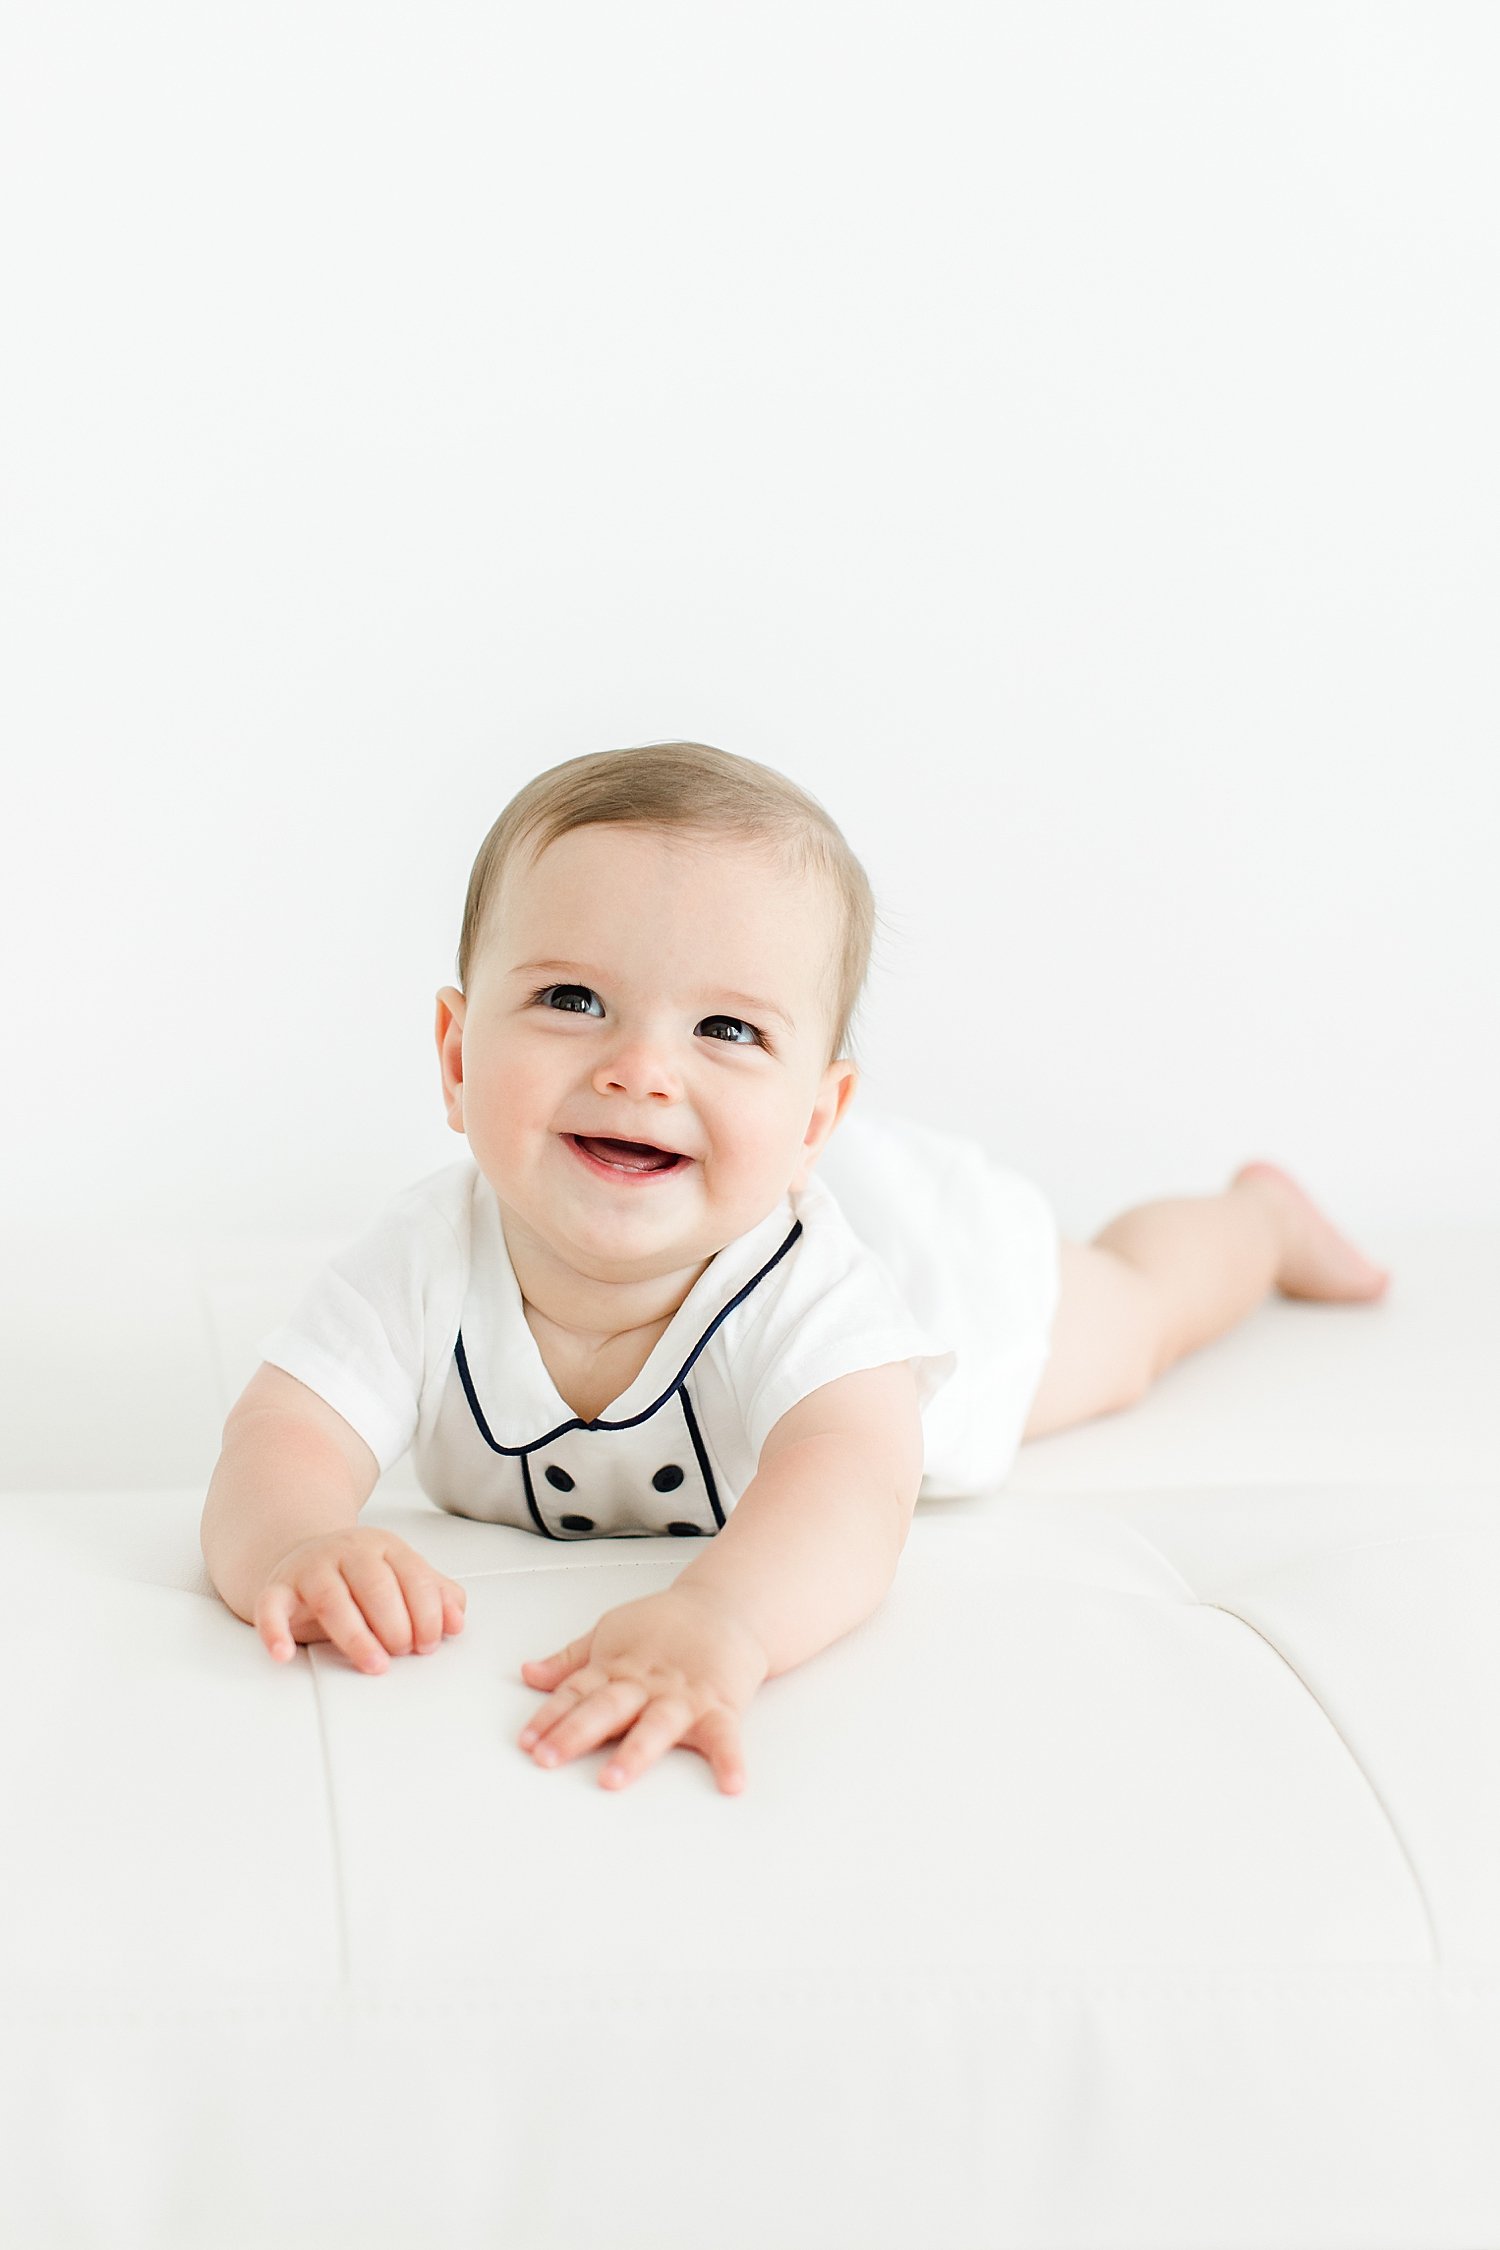 Milestone session for 8 month old baby boy in studio in Westport. Photo by Kristin Wood Photography.